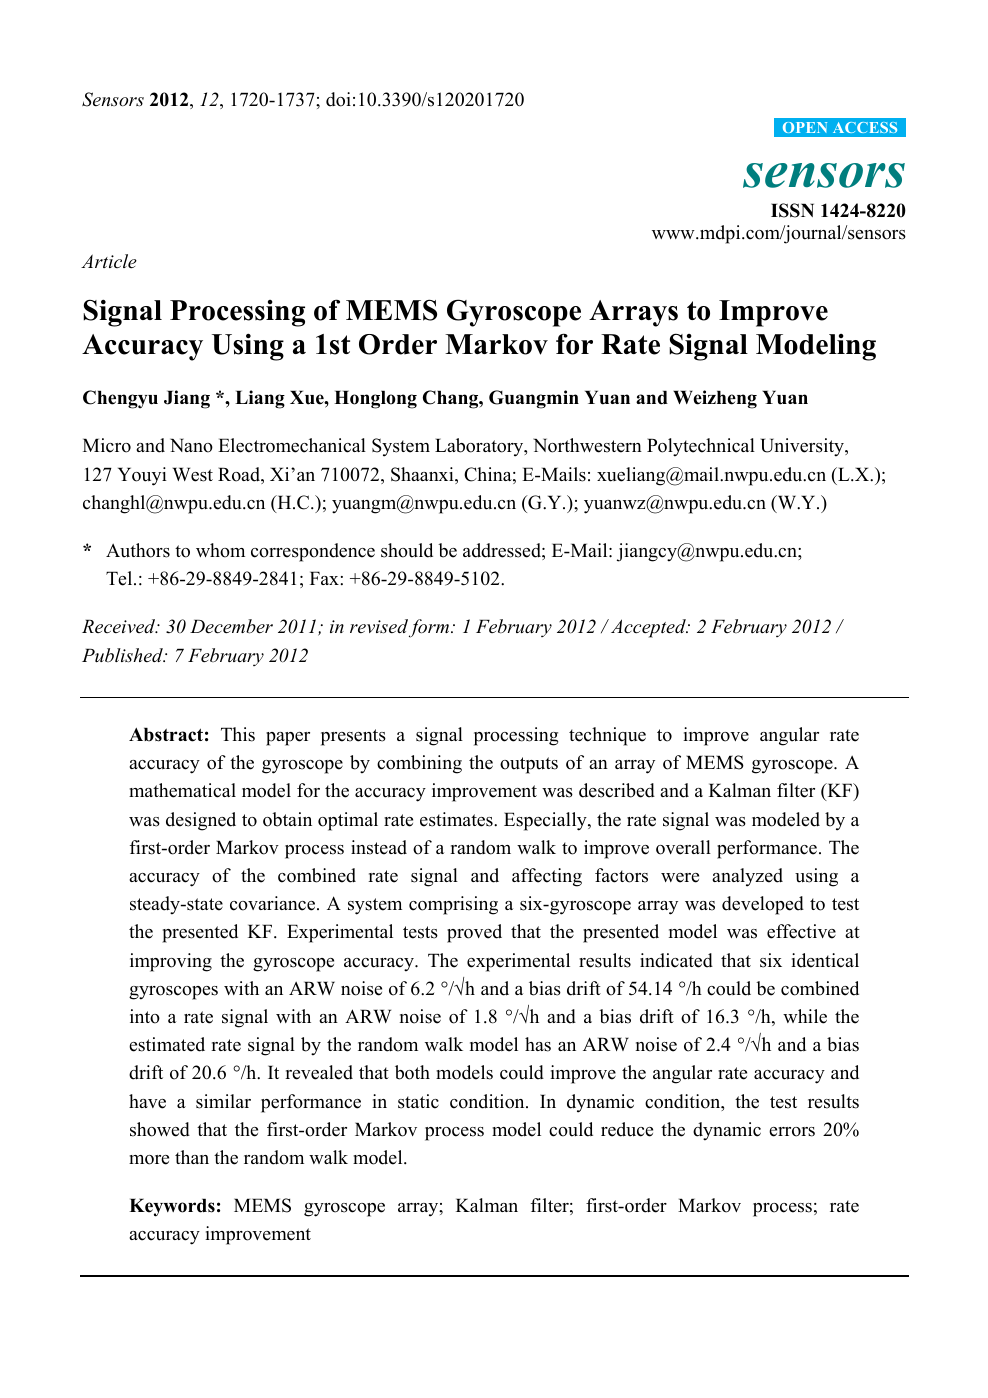 Signal Processing Of Mems Gyroscope Arrays To Improve Accuracy Using A 1st Order Markov For Rate Signal Modeling Topic Of Research Paper In Materials Engineering Download Scholarly Article Pdf And Read